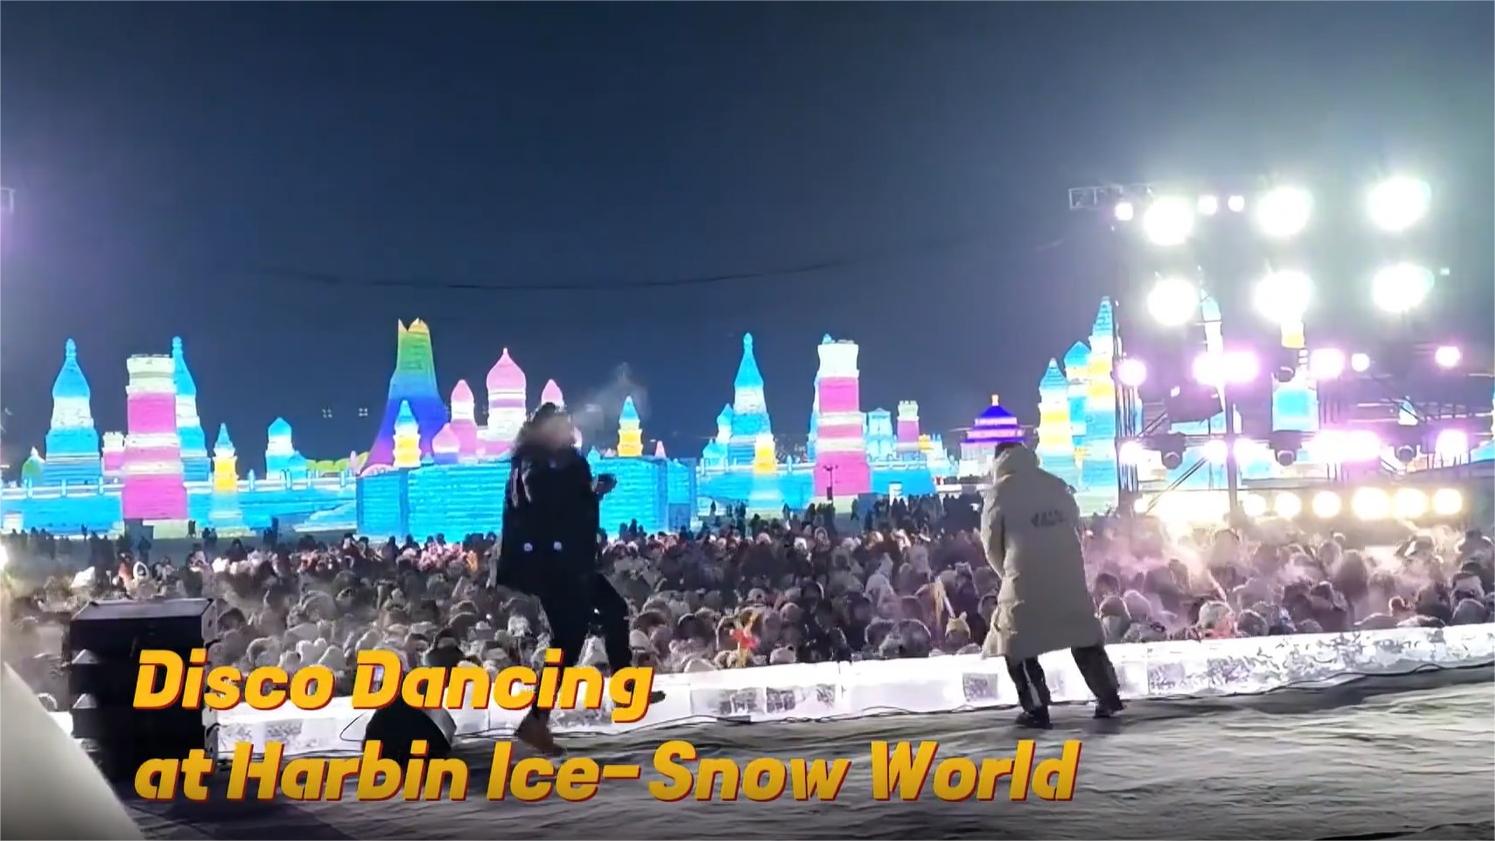 Ice and Snow World dance party: Music ignites winter at night!